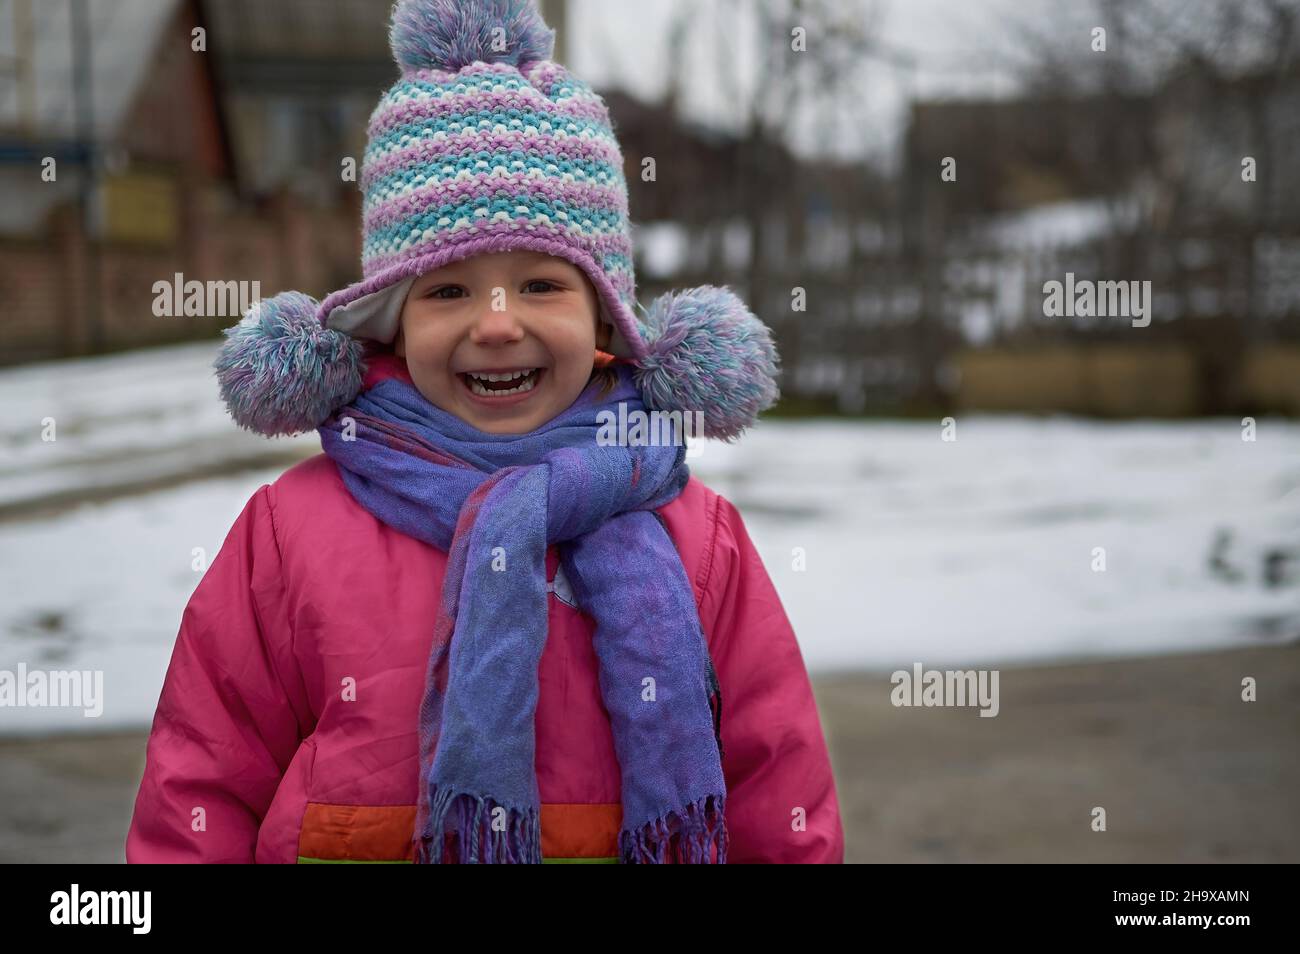 small toddler girl smiling in winter outdoor with Rainbow Hat and muffler Stock Photo